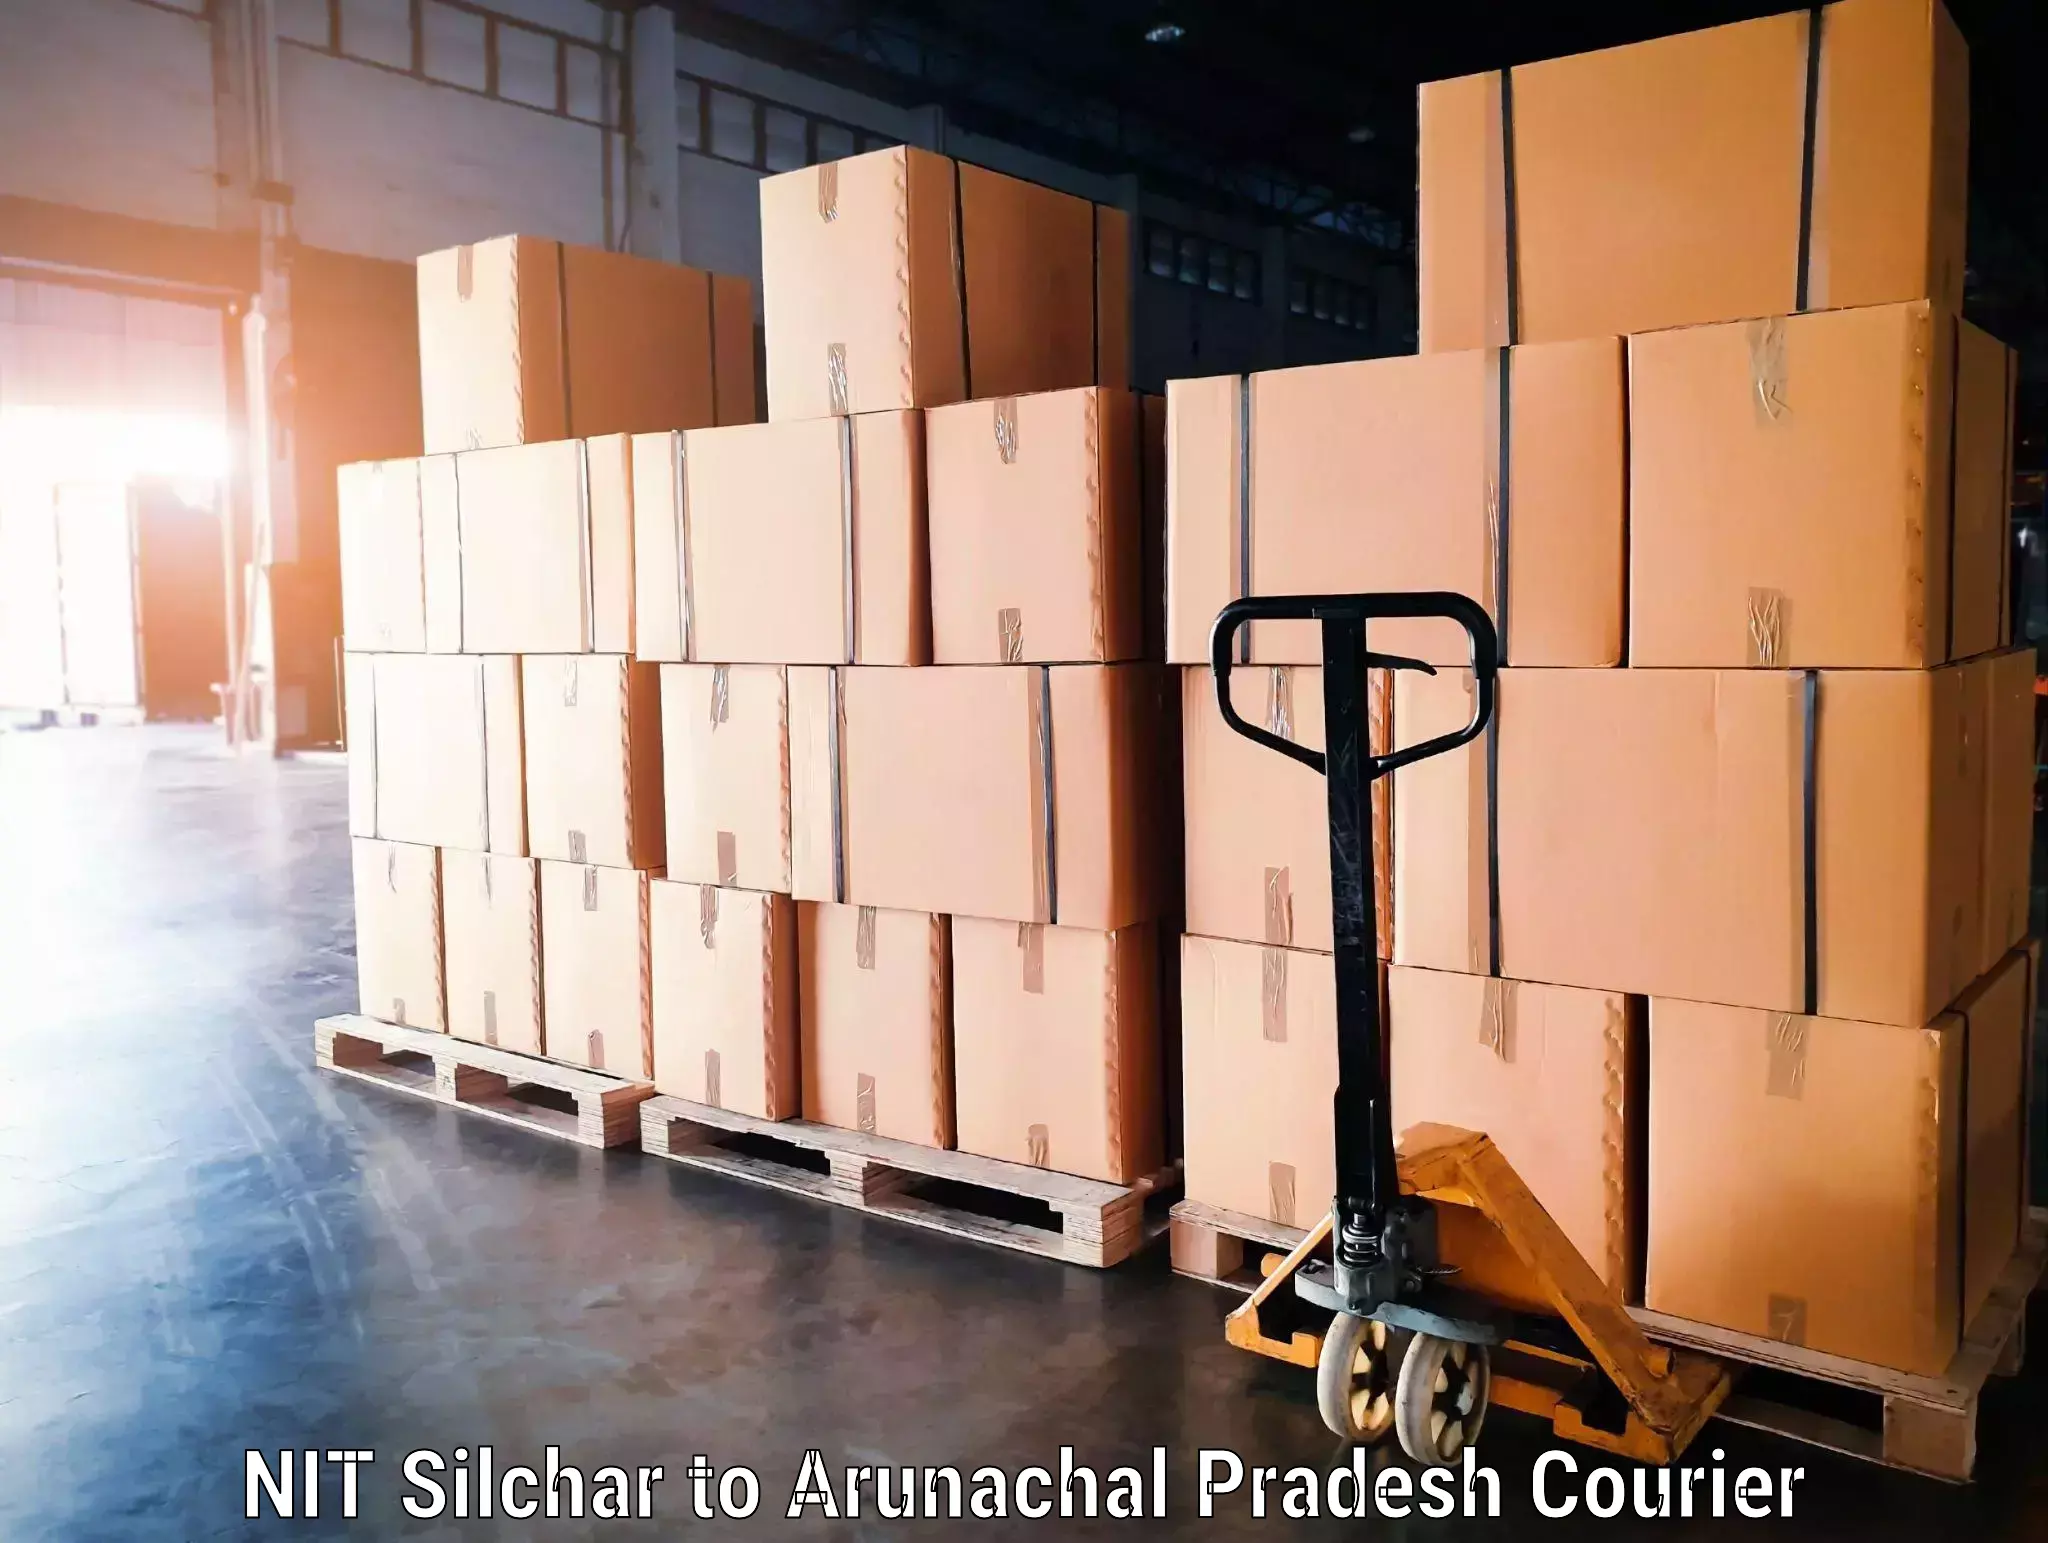 Luggage transport company NIT Silchar to Aalo